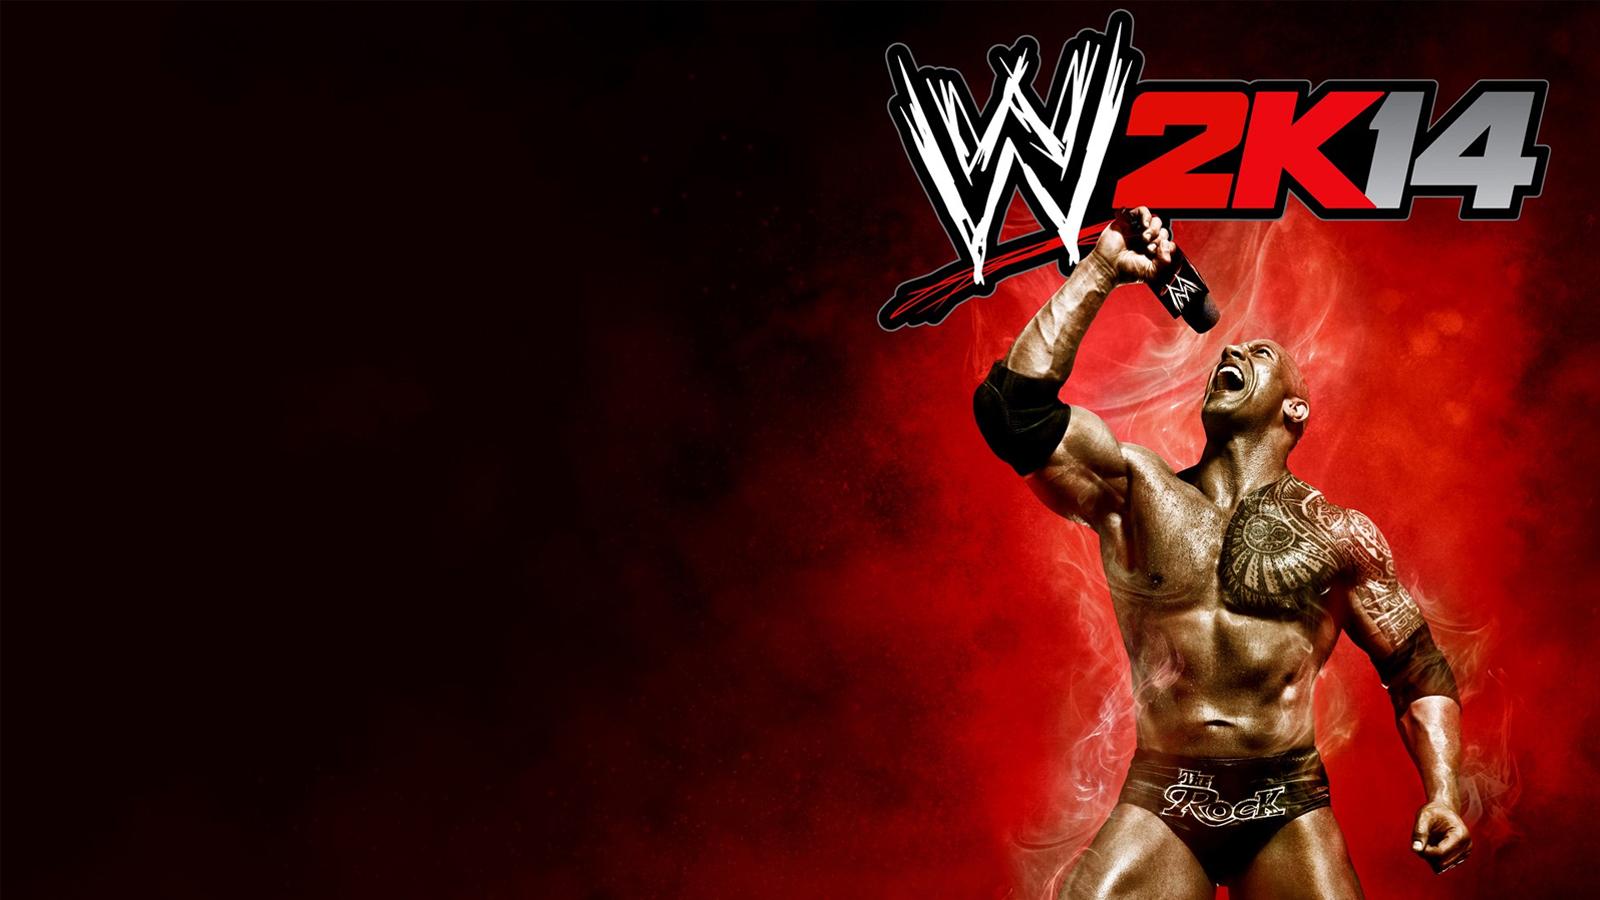 The Rock Wwe Wallpapers